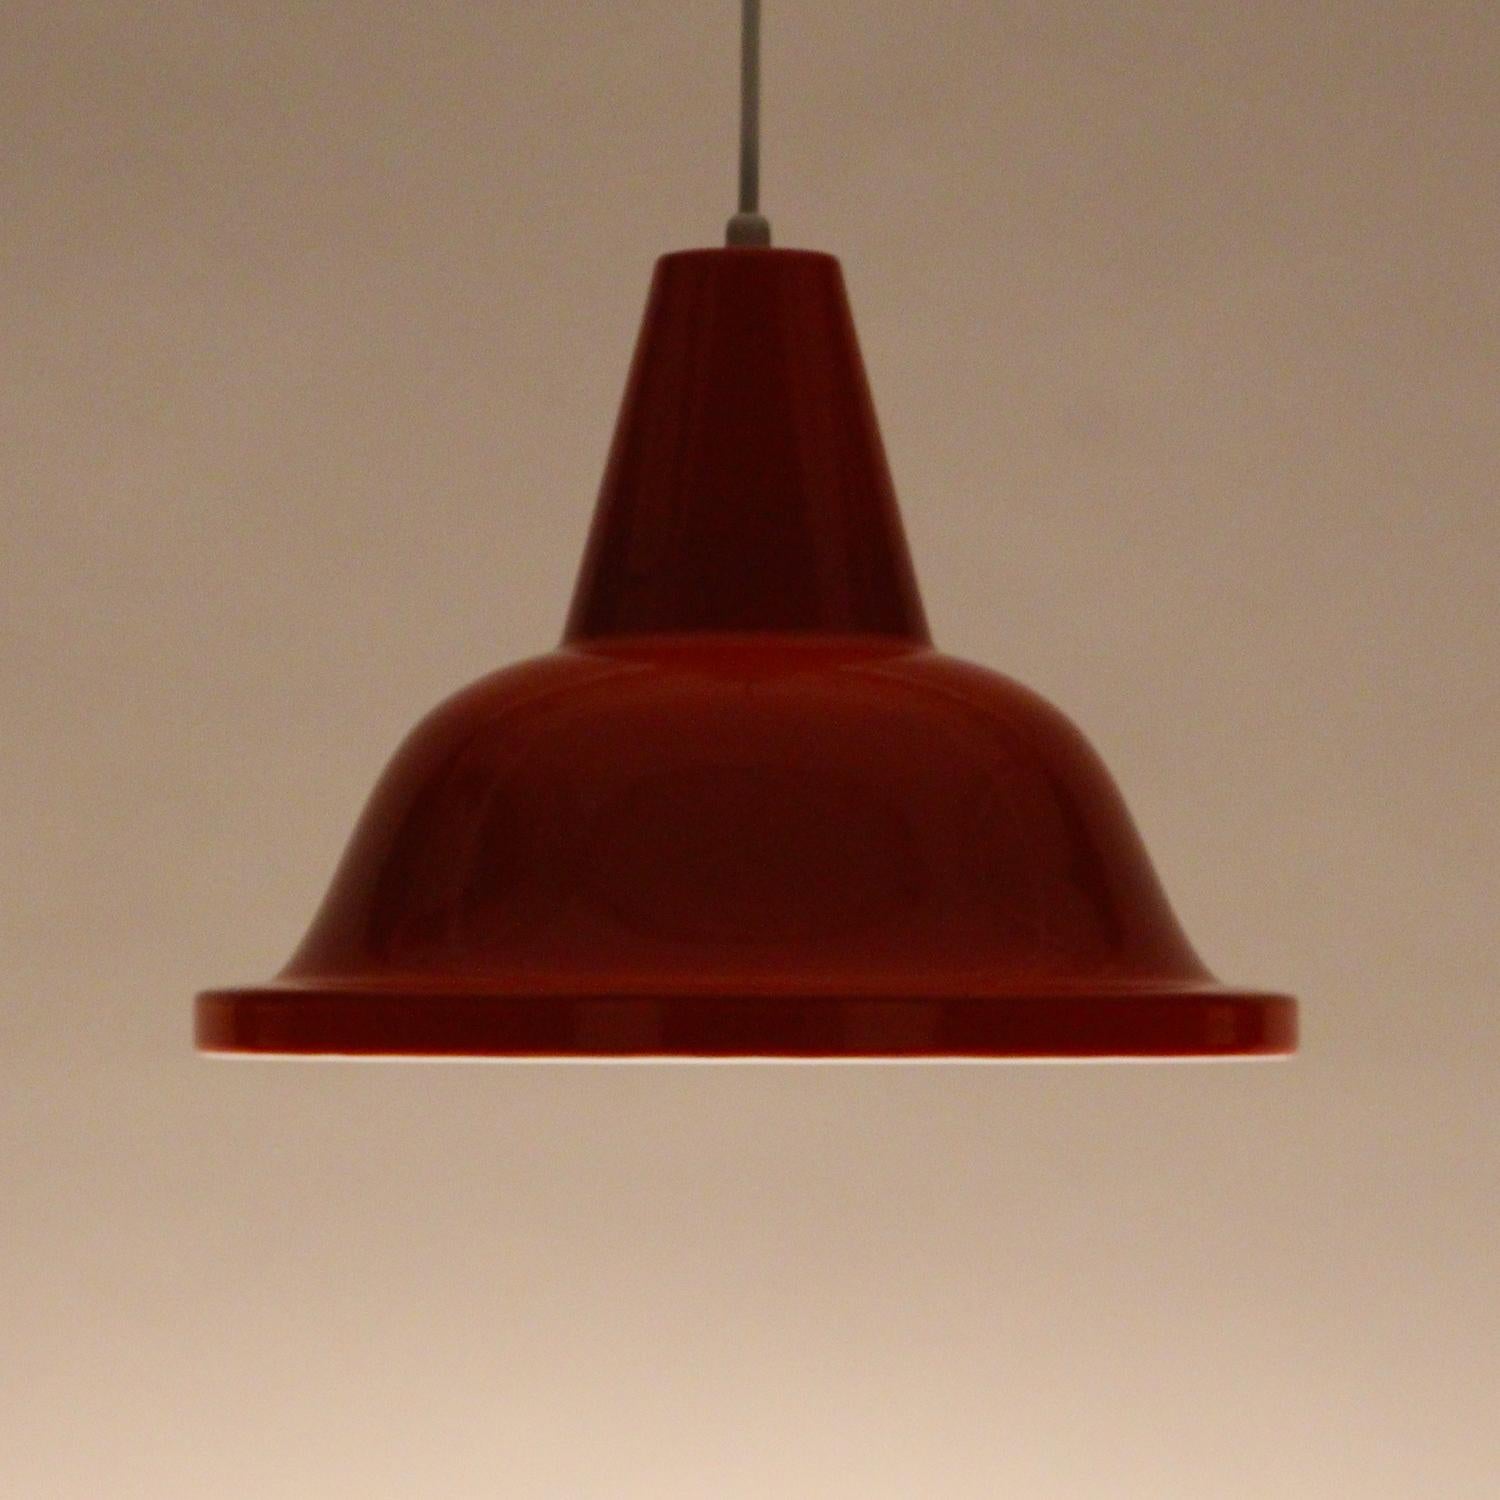 Orange pendant, circa 1960s Scandinavian industrial hanging lamp in bright orange enamel - in excellent vintage condition.

A large metal pendant, coated with shiny bright orange enamel on the outside, while the inside is coated with shiny white